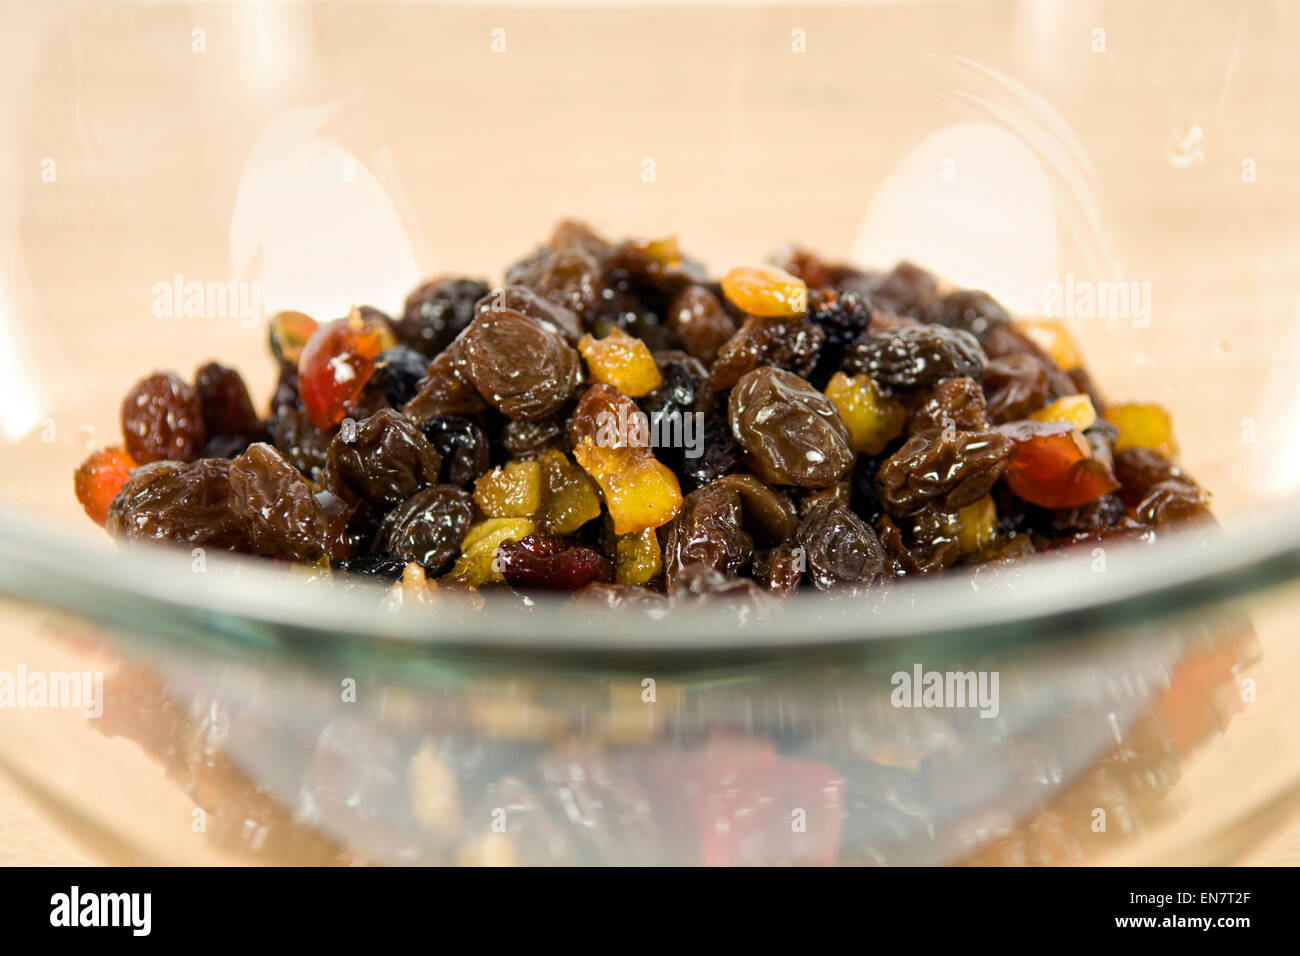 Dried fruit soaking in brandy in glass bowl in preparation for making a fruit cake Stock Photo